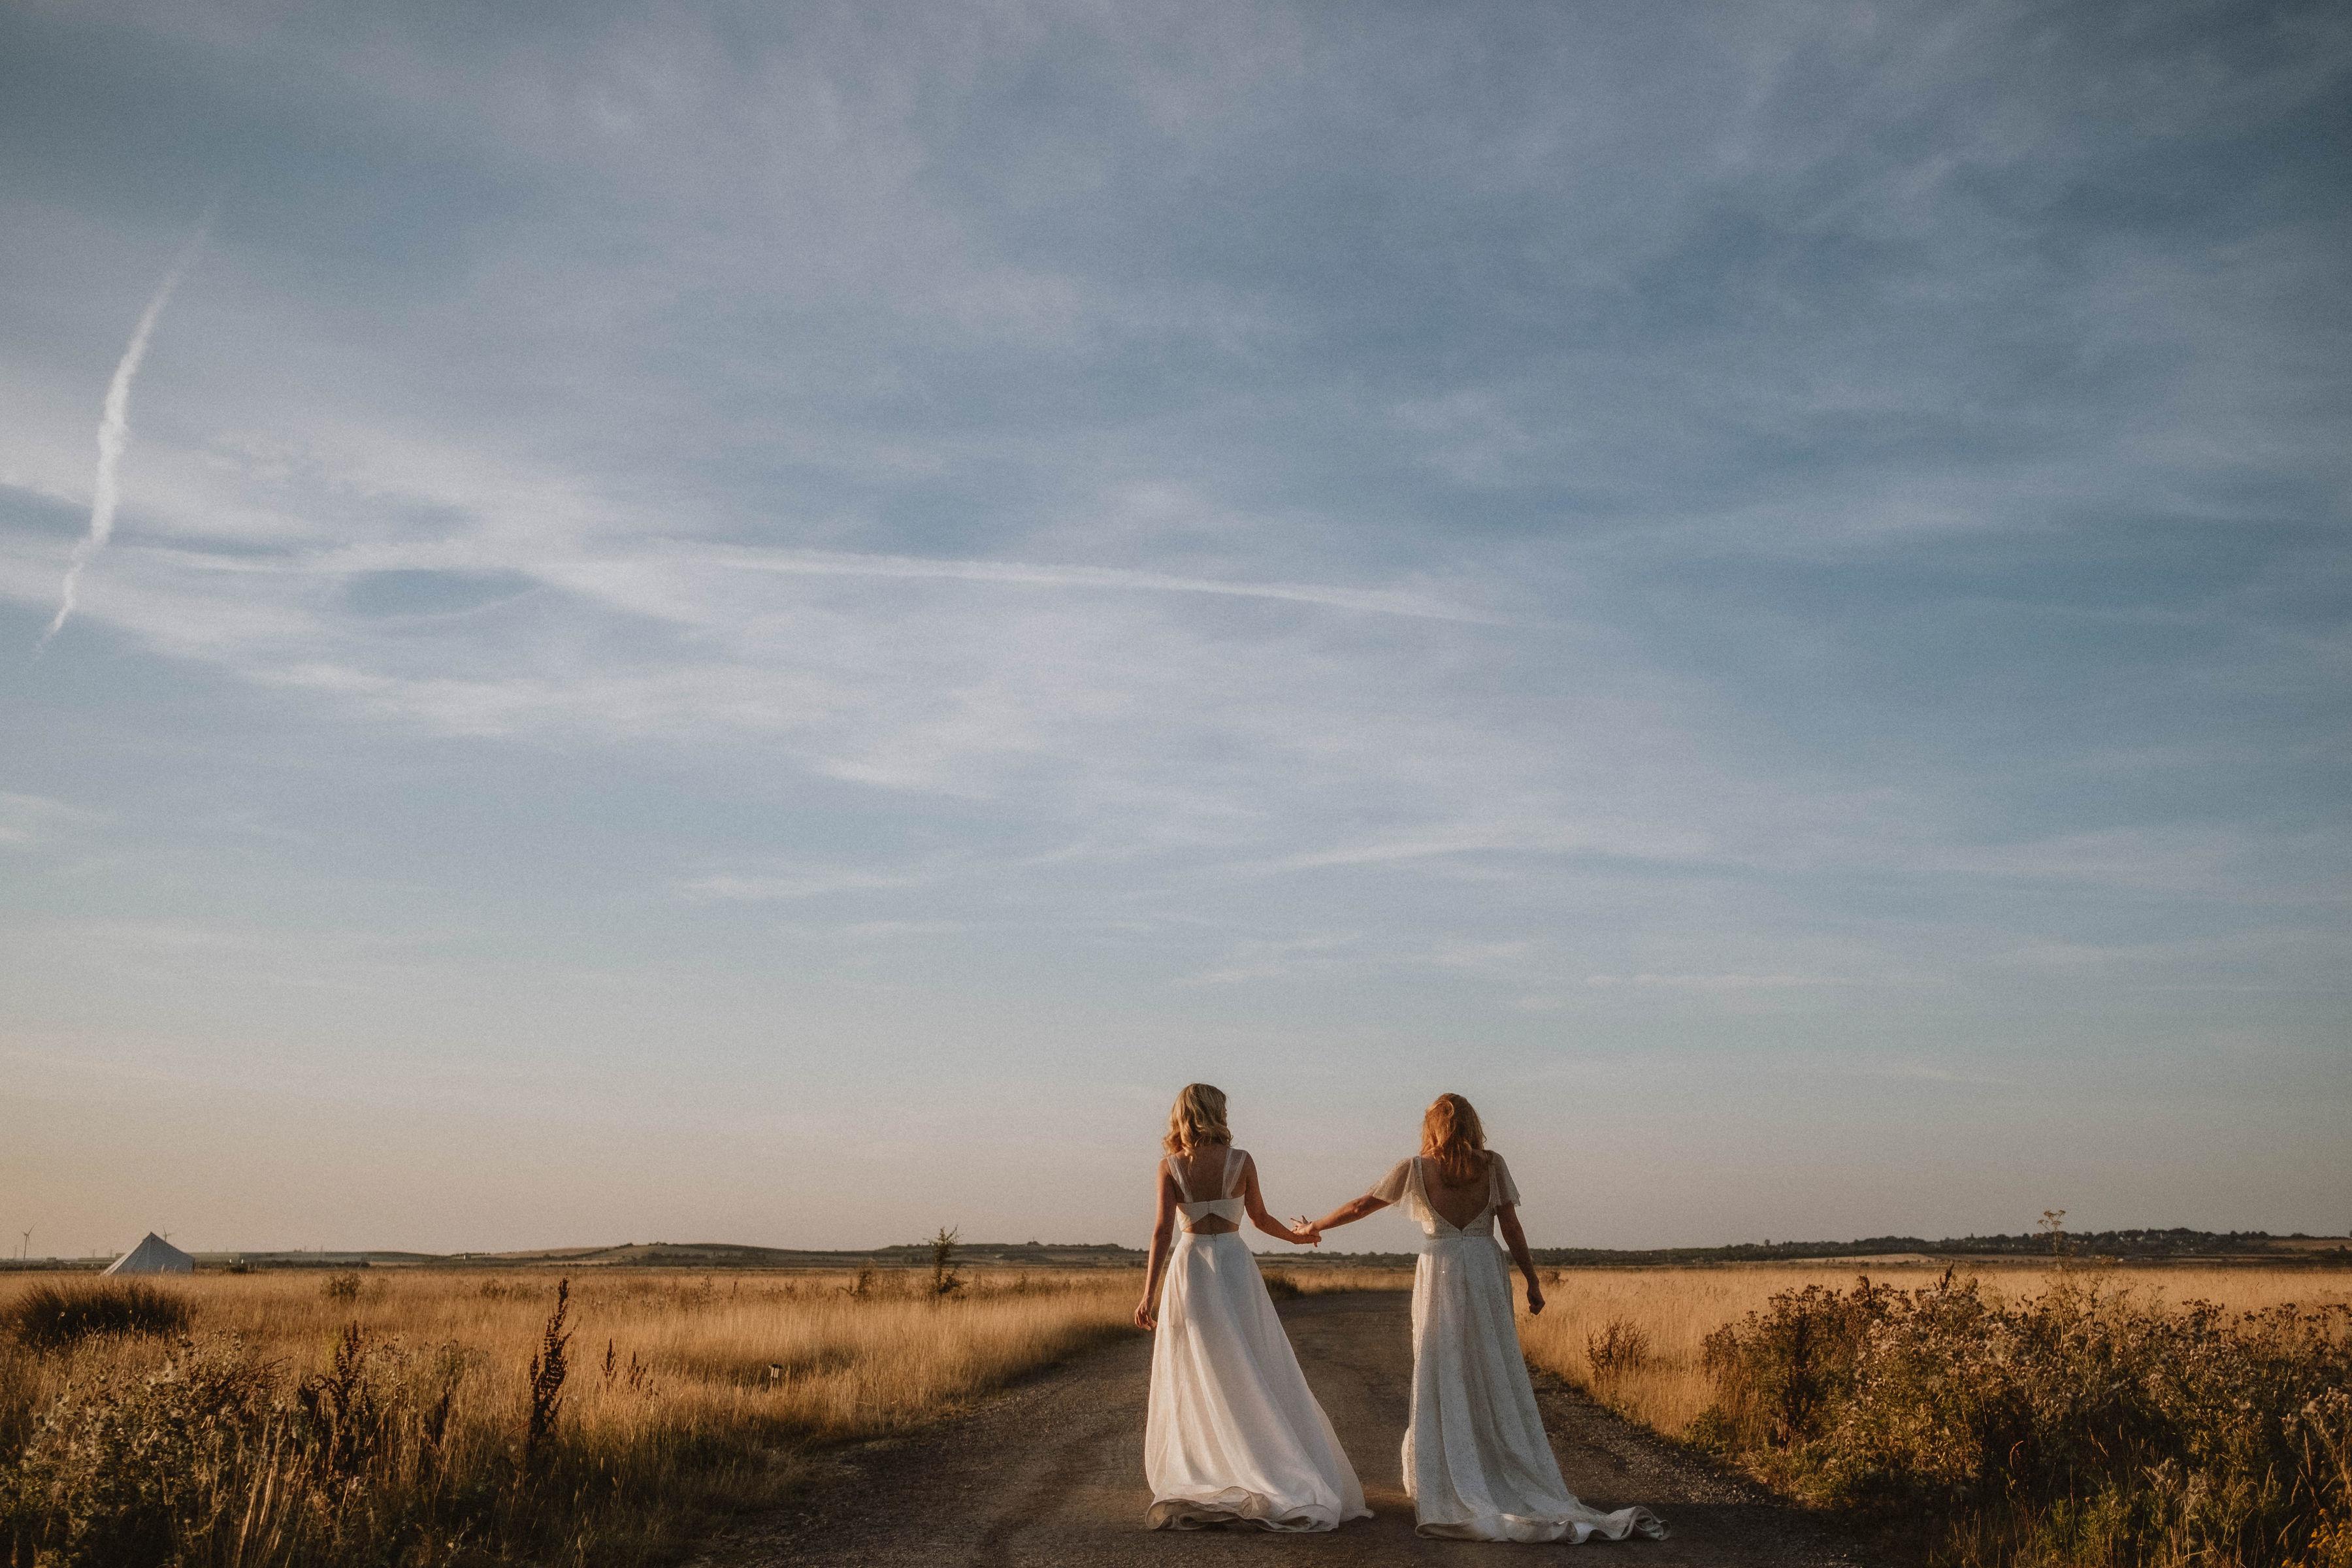 Two brides walk hand-in-hand, backs facing us as they walk through Elmley Nature reserve. The sun is setting, leaving a warm glow across the dried grass fields